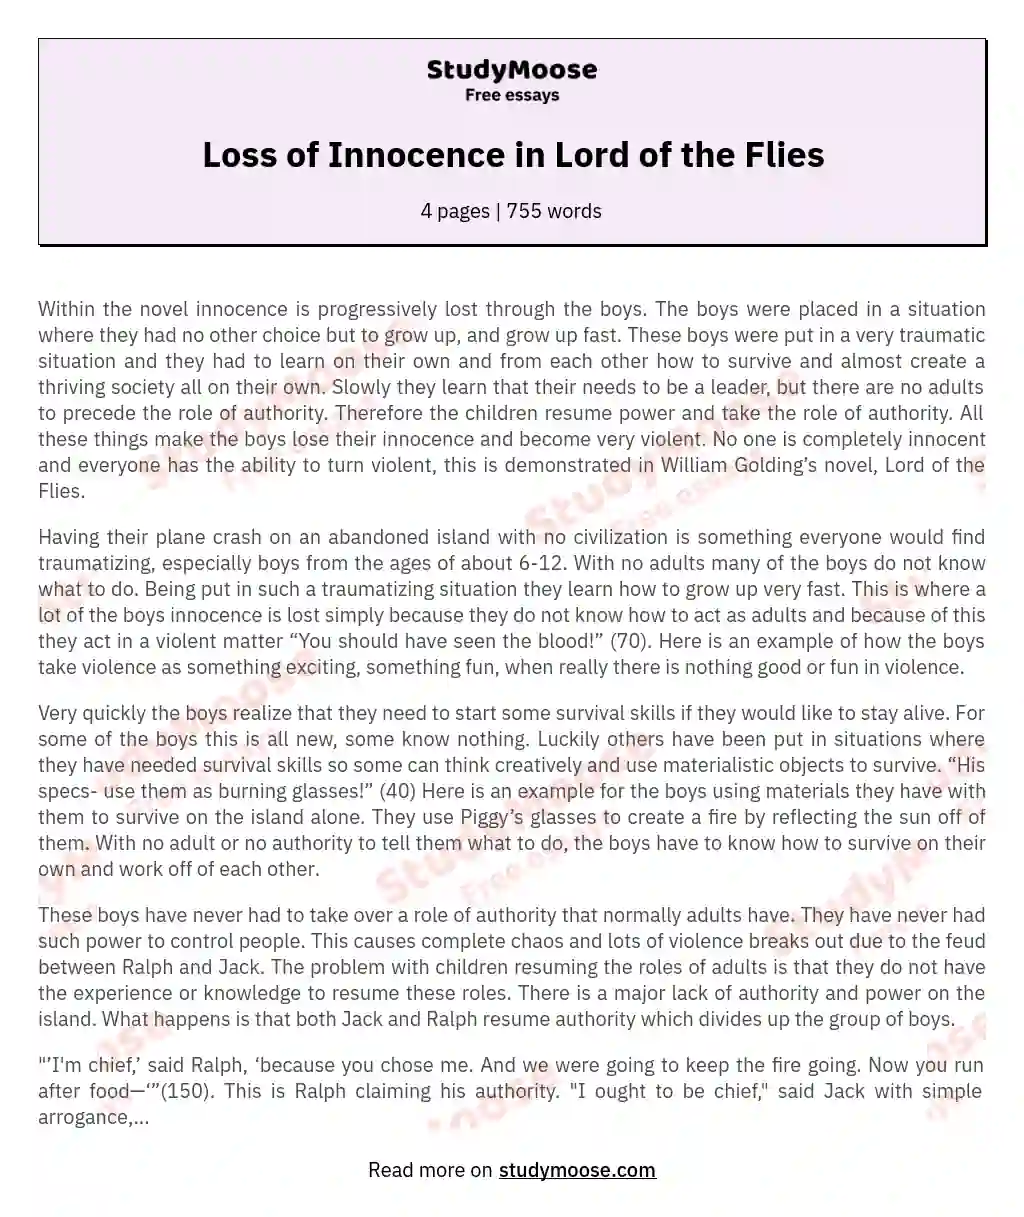 Loss of Innocence in Lord of the Flies essay